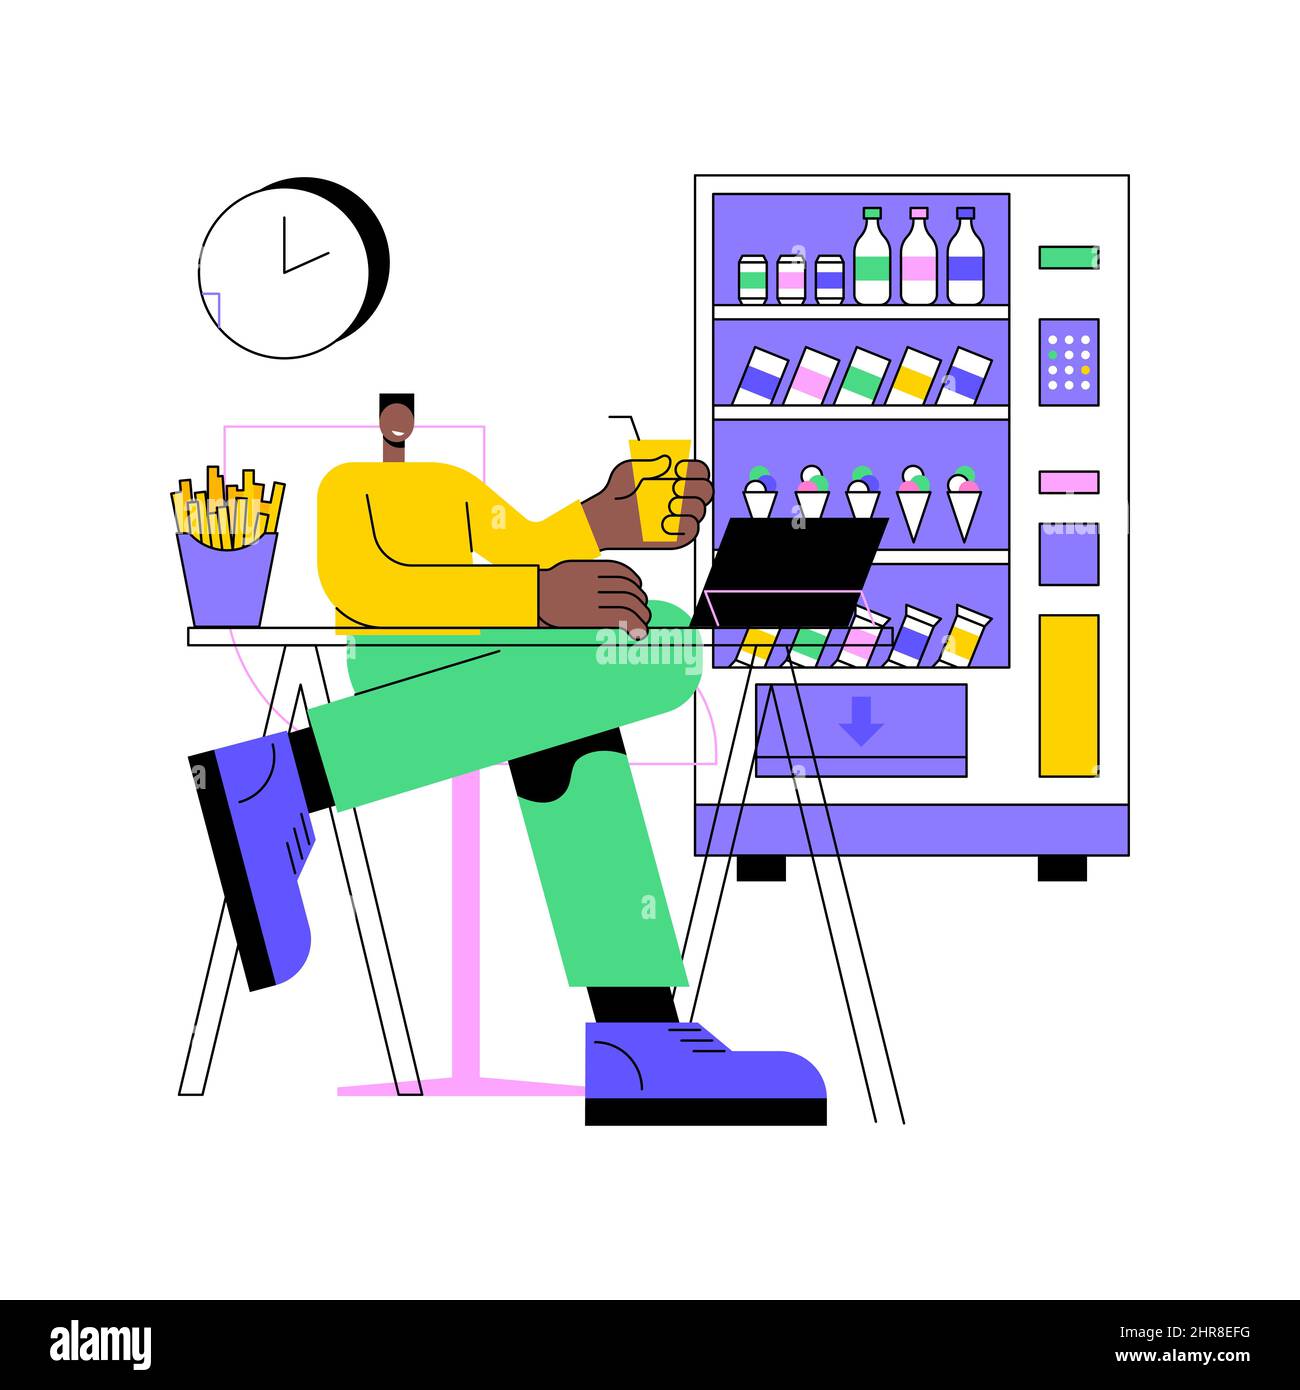 Snacking non-stop abstract concept vector illustration. Mindless snacking, junk food, non-stop eating while working, reduce cholesterol use, diet and nutrition, addictive habit abstract metaphor. Stock Vector